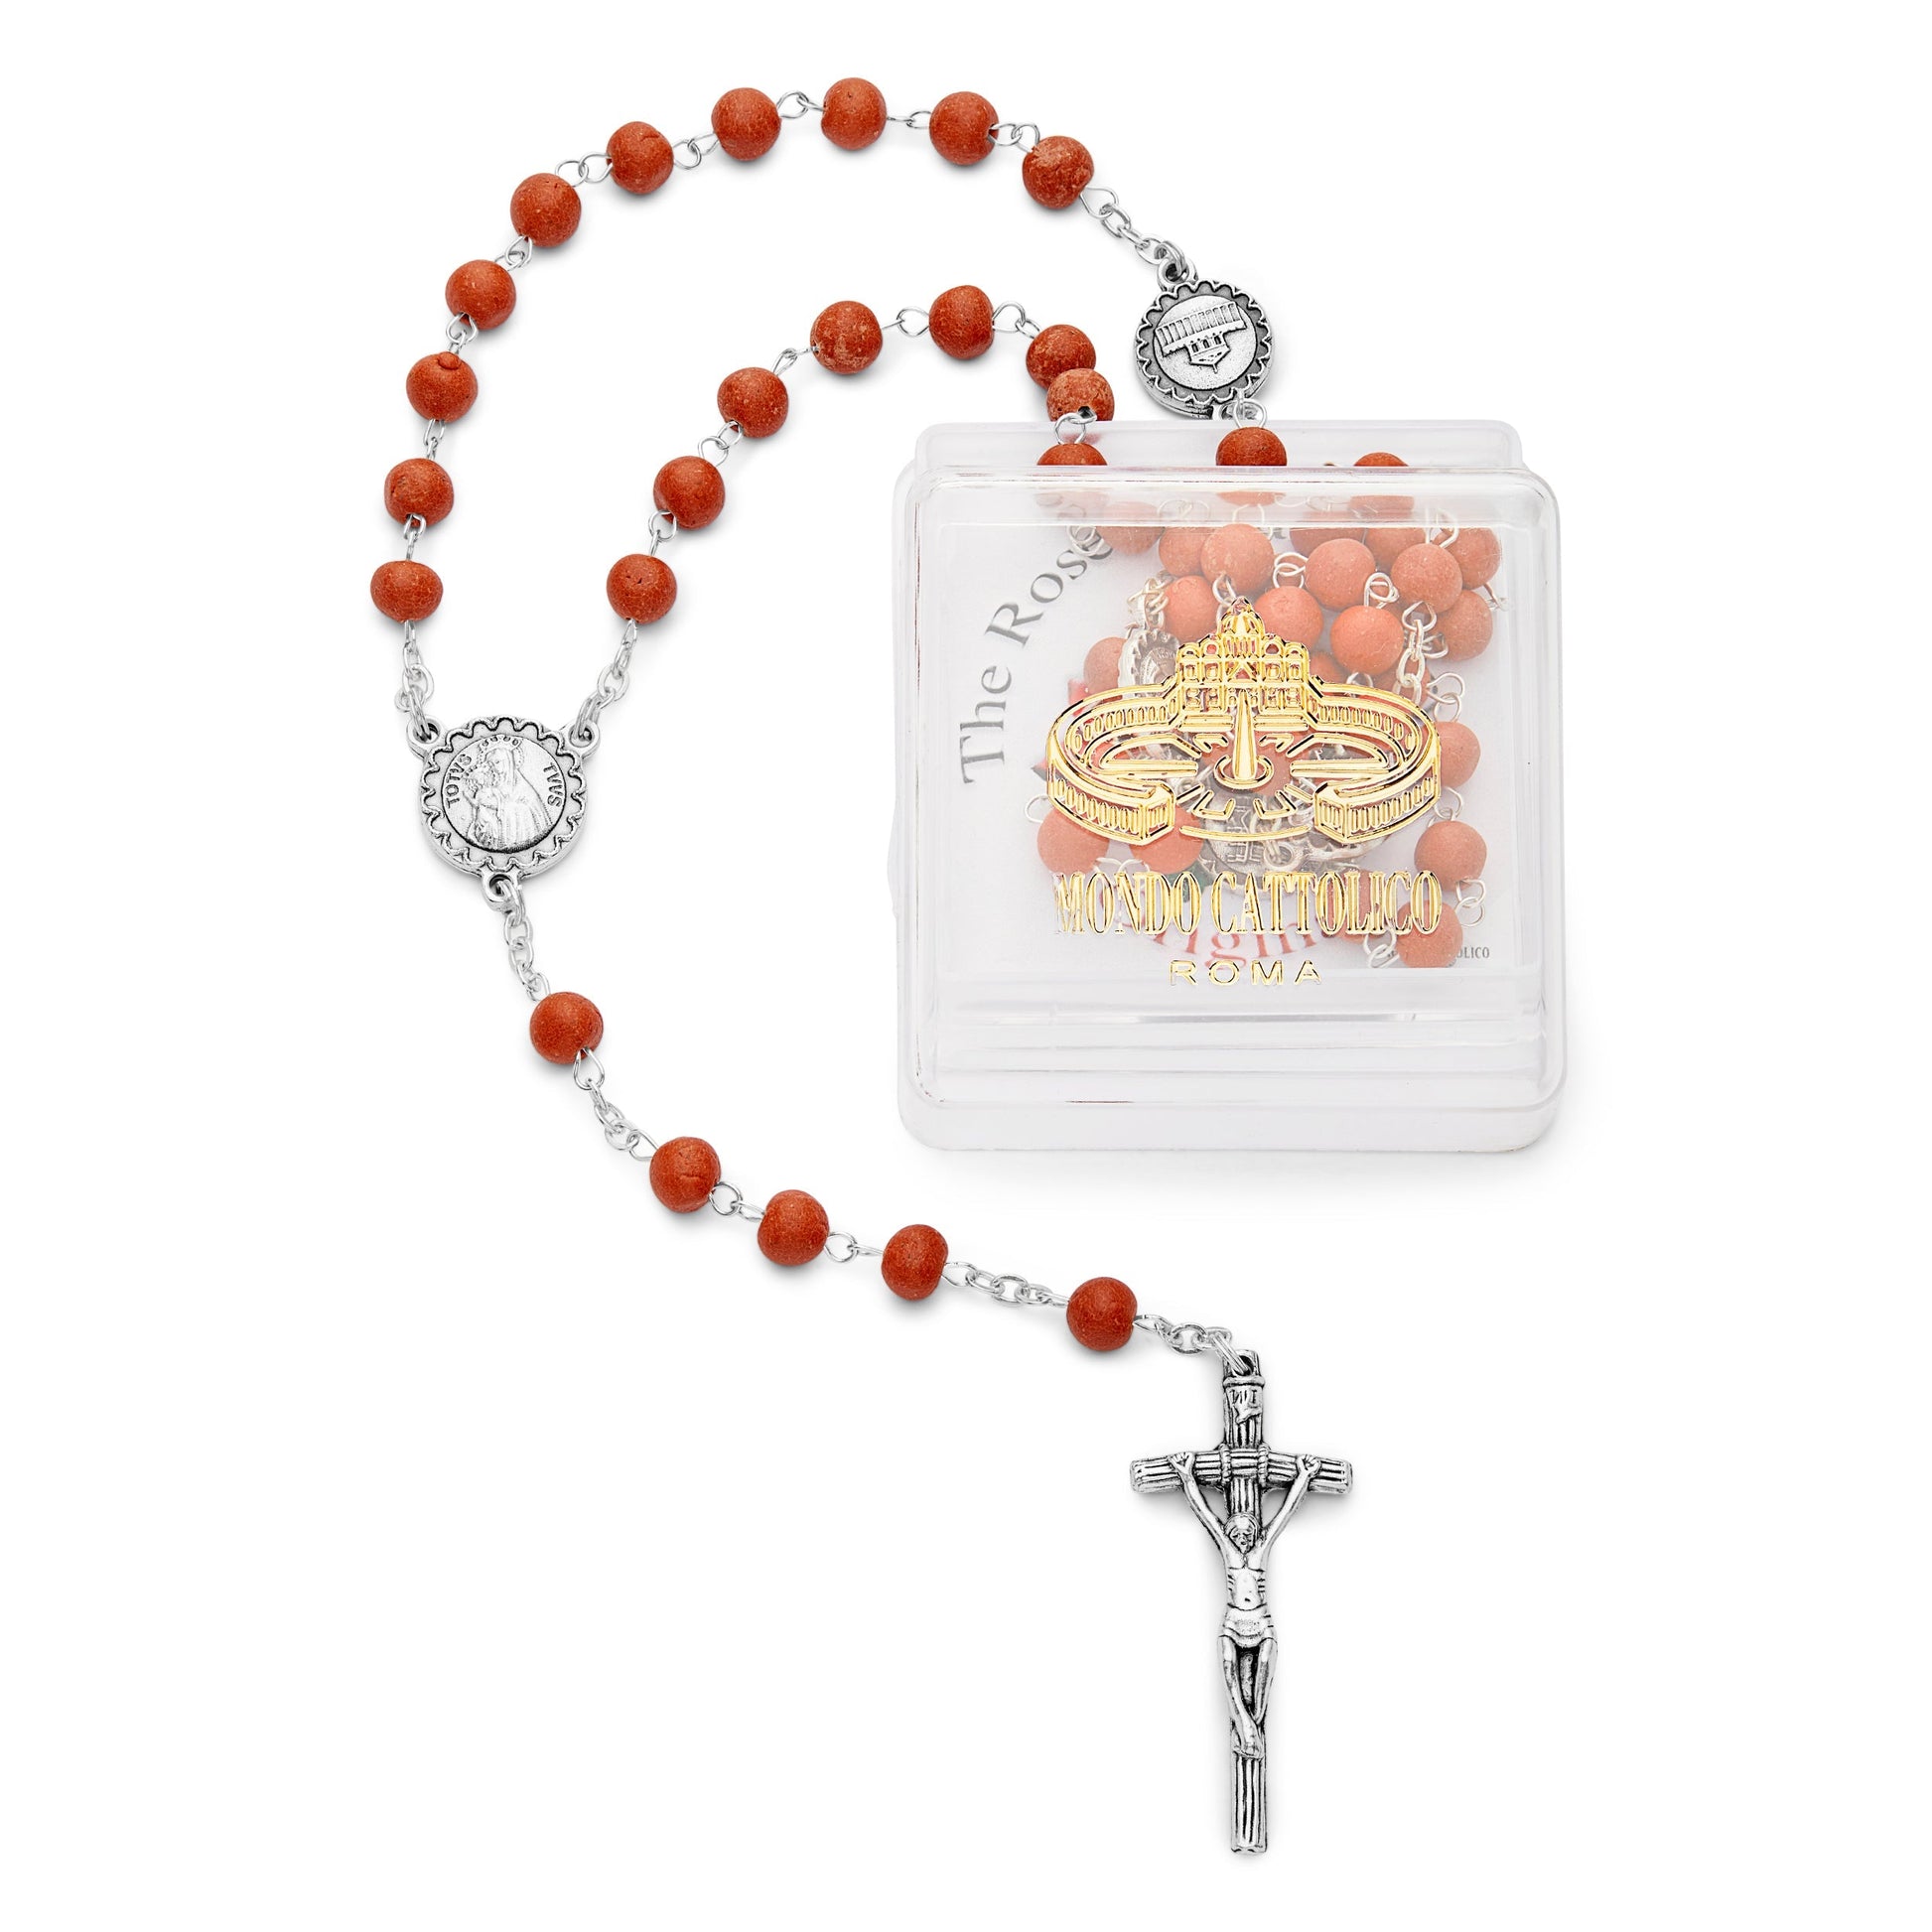 MONDO CATTOLICO Prayer Beads Real Rose Petal Rosary T. Tuus San Benedetto